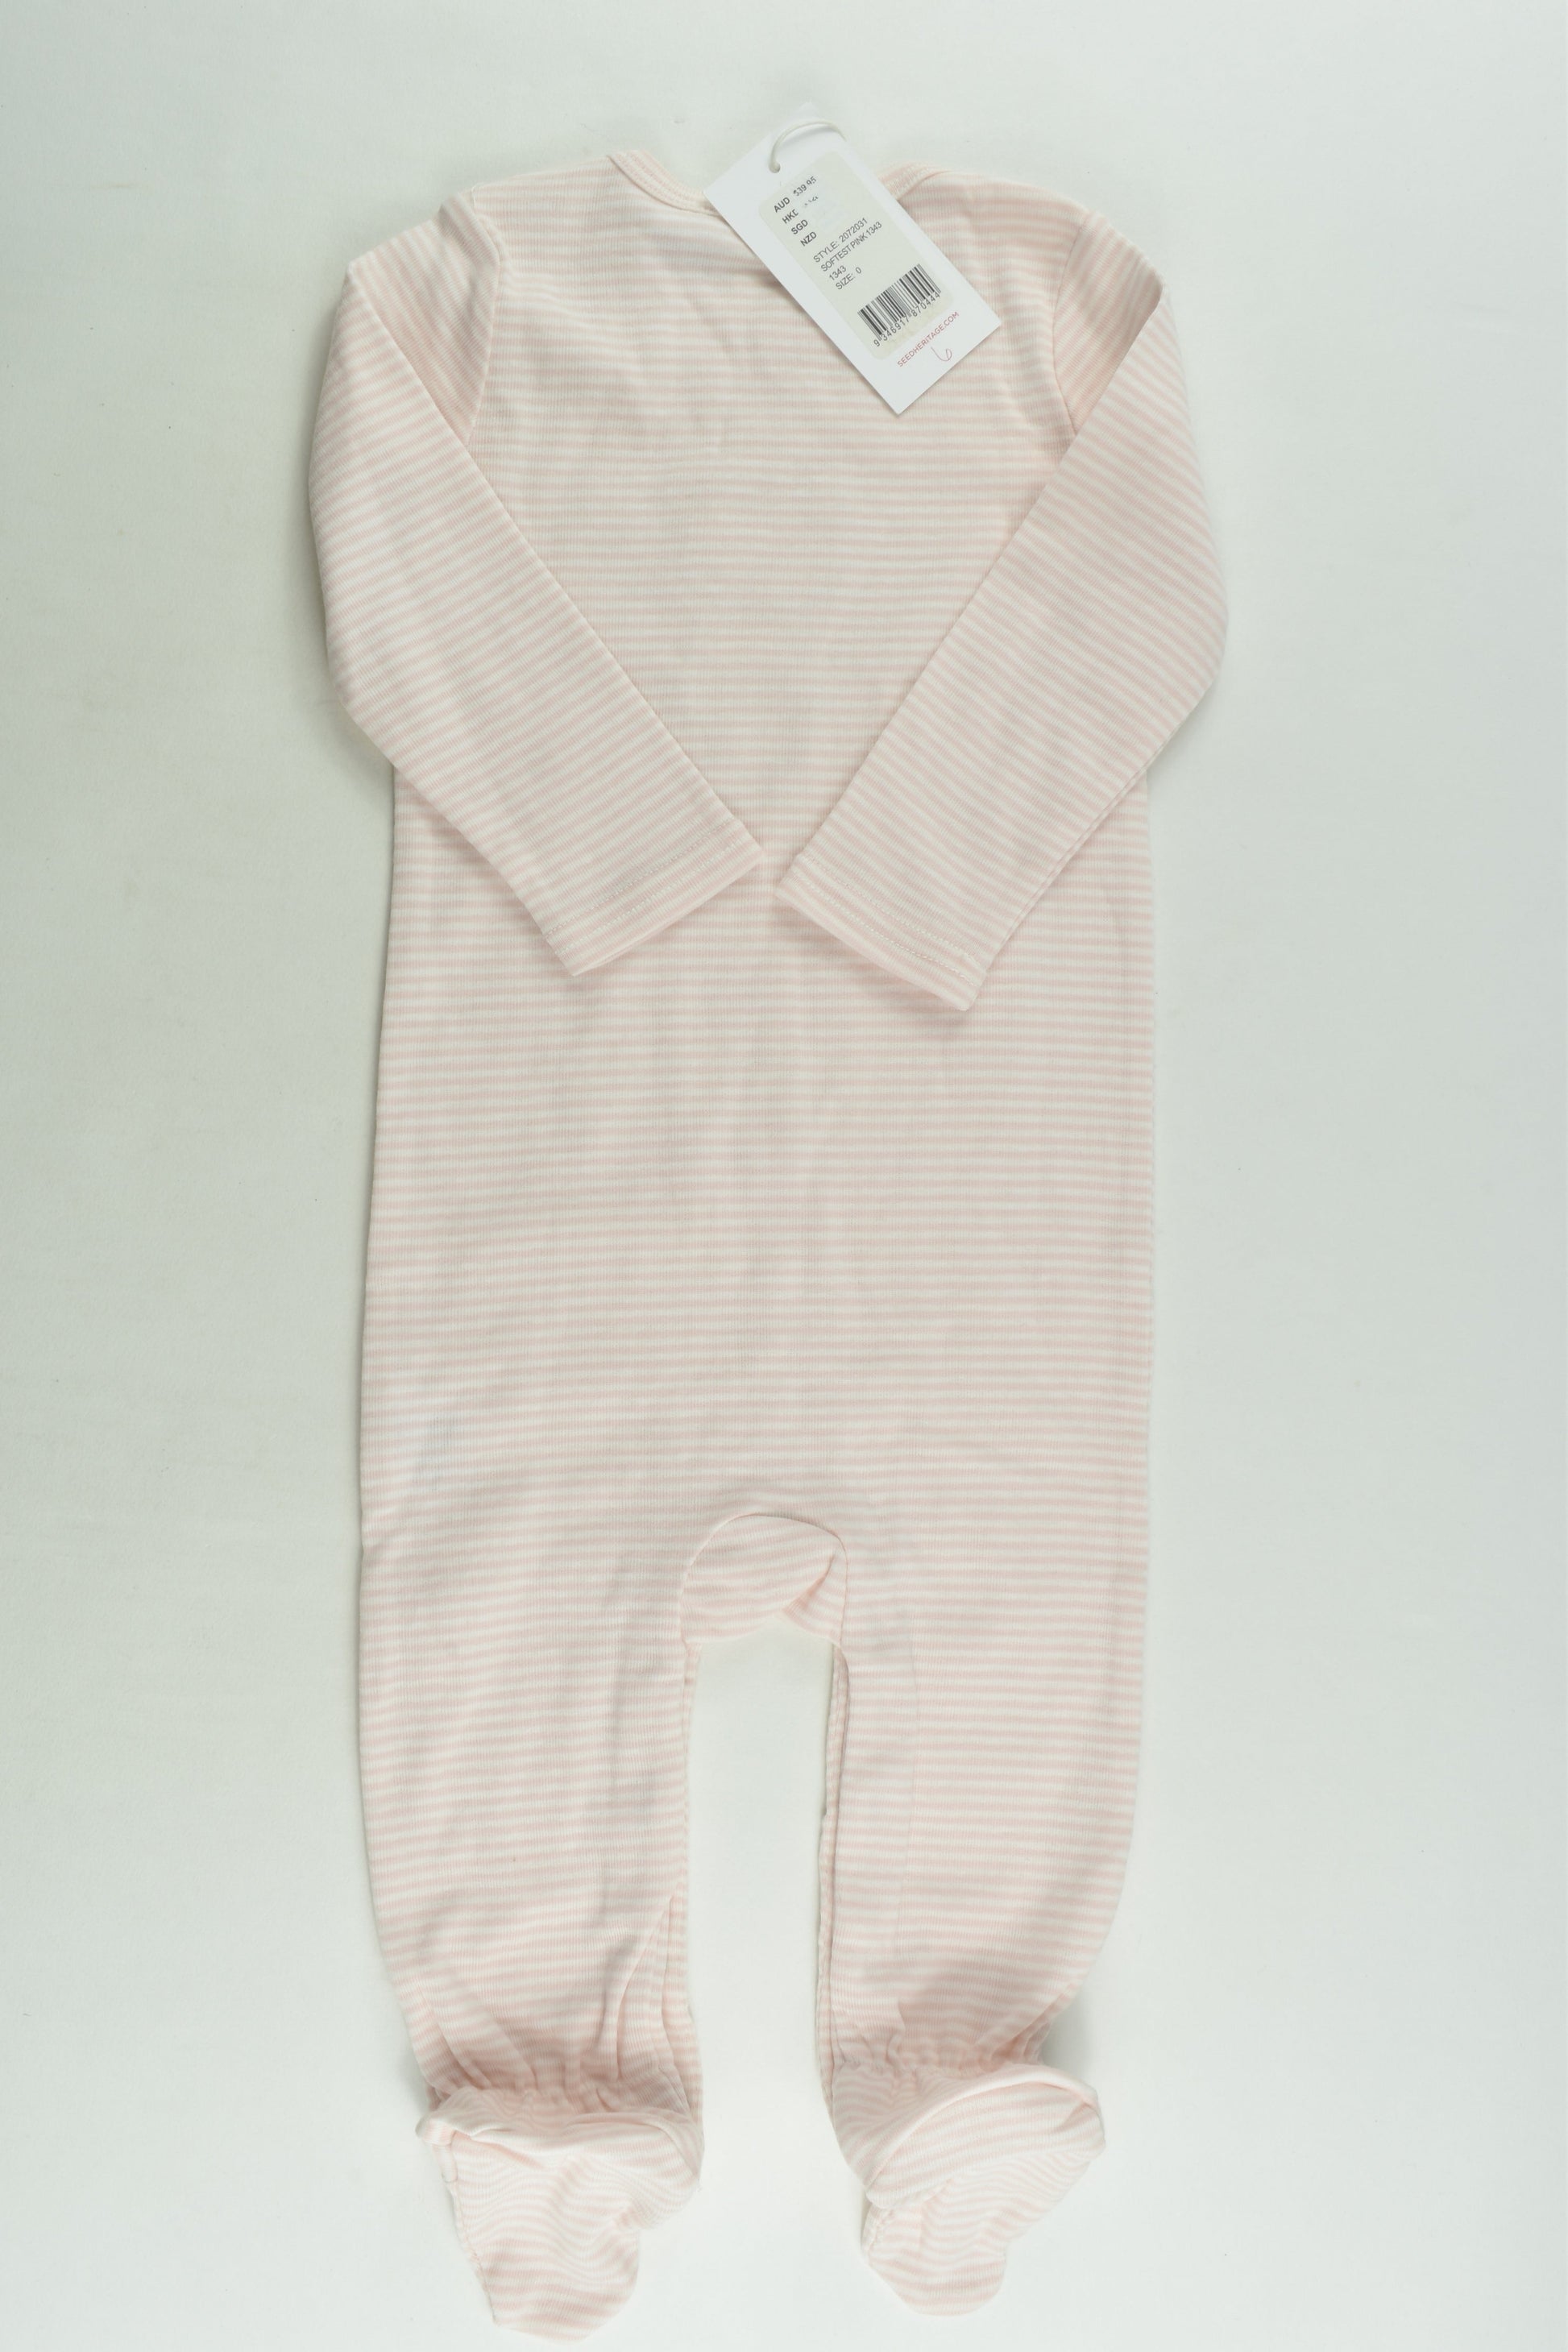 NEW Seed Heritage Size 0 Footed Romper